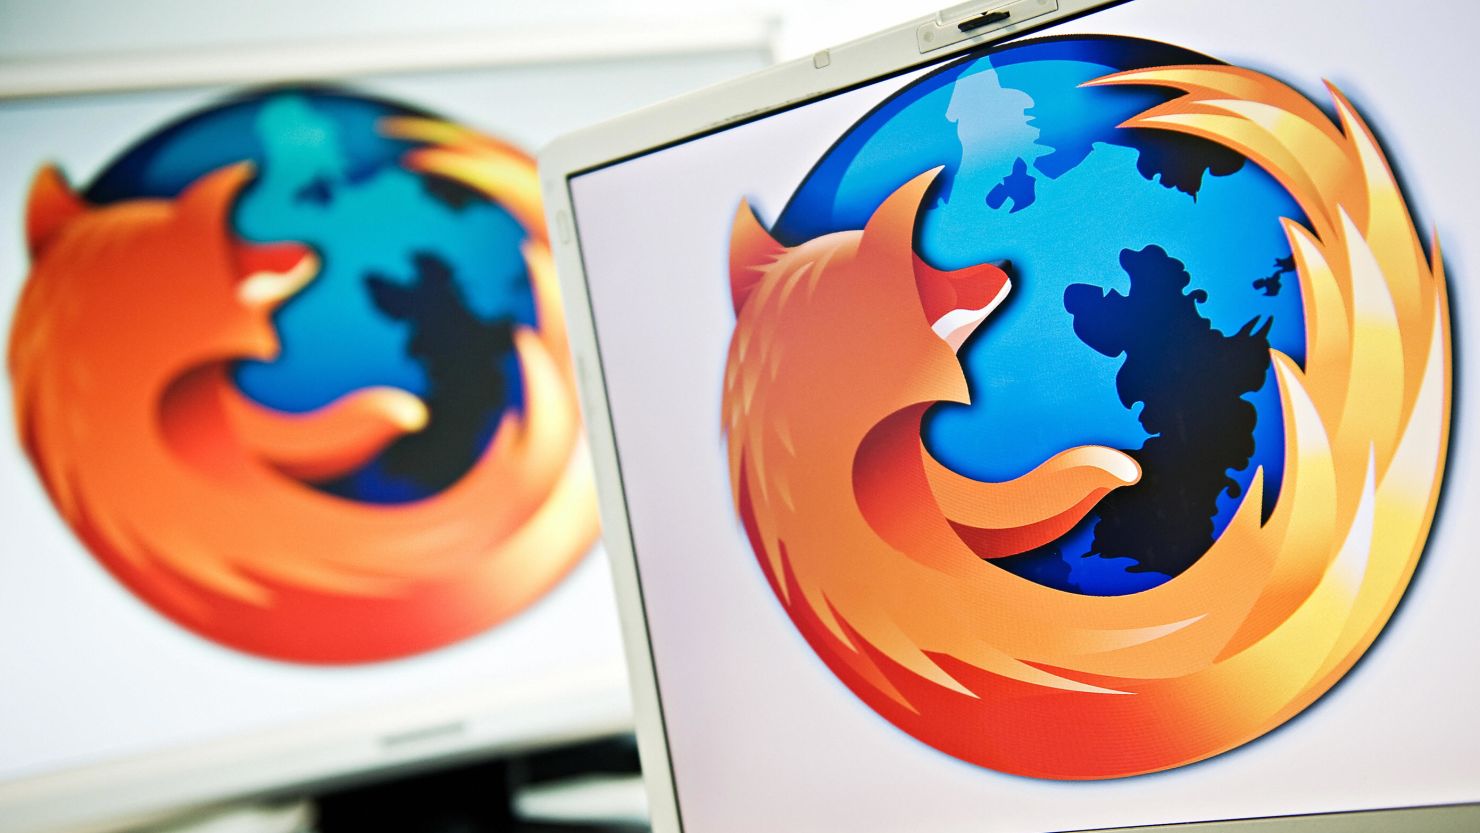 The Firefox web browser for 2012 is expected to come with new and improved features.